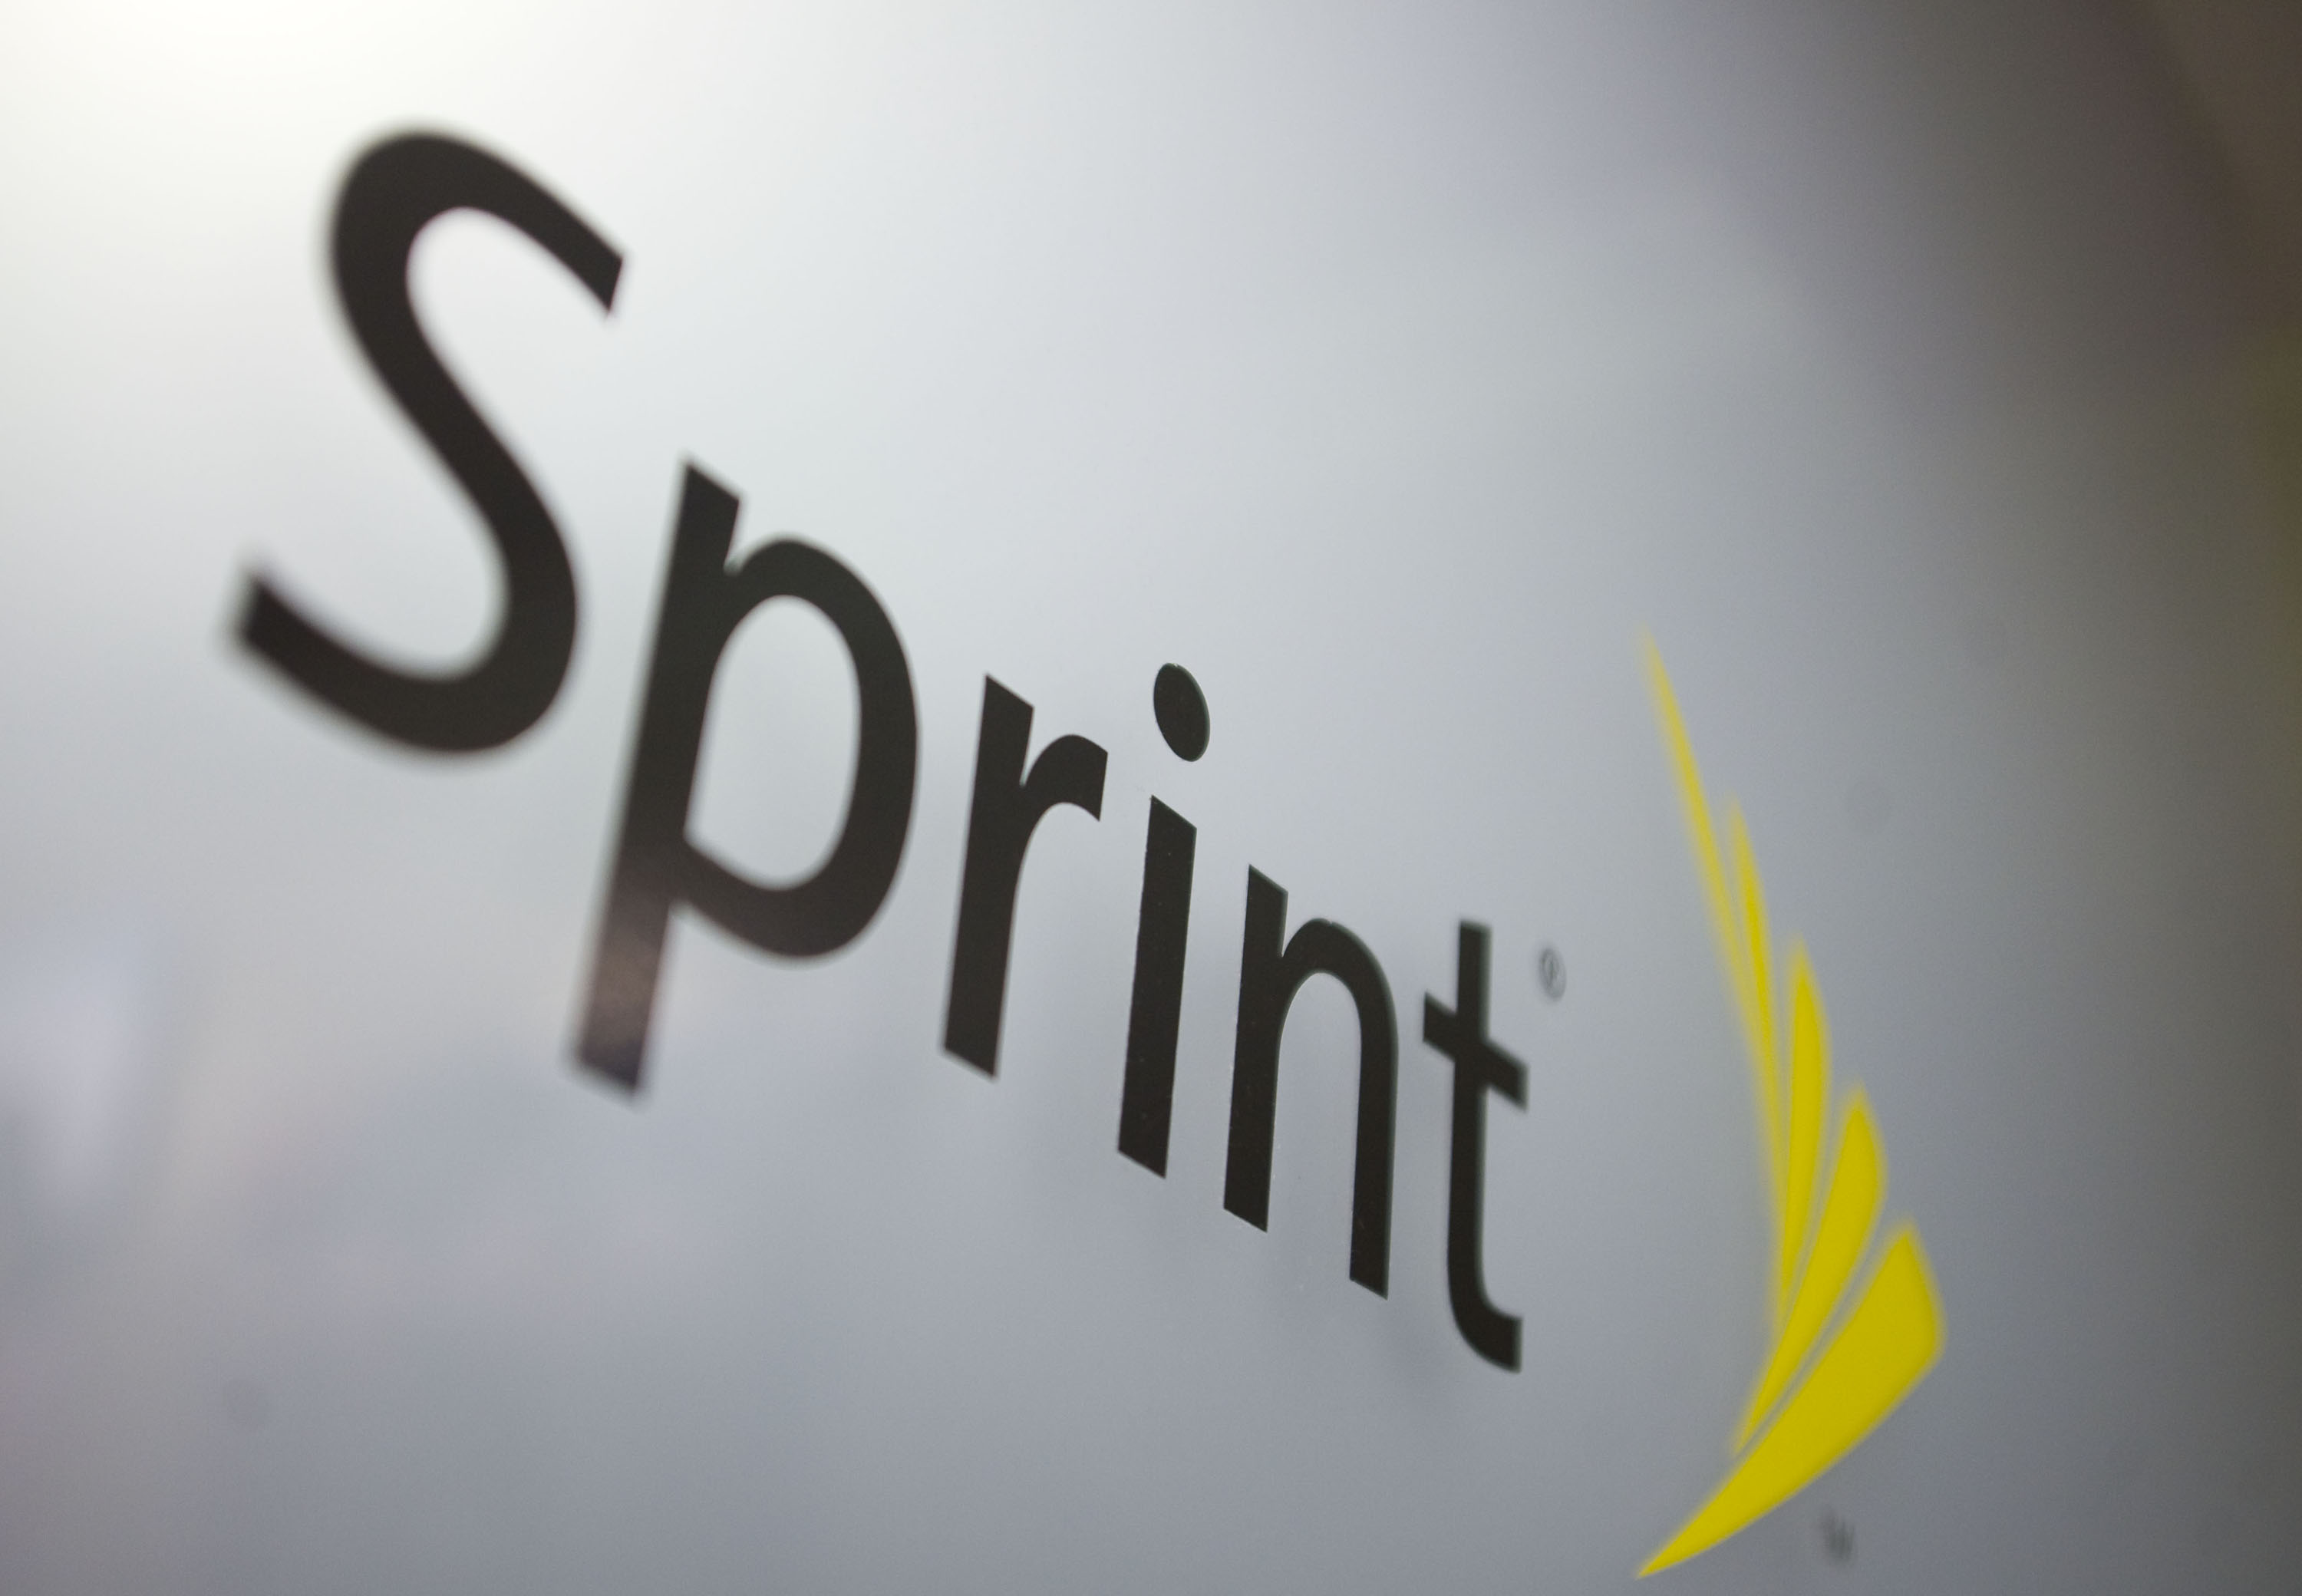 Sprint shares fall 9% on reports of failed T-Mobile merger